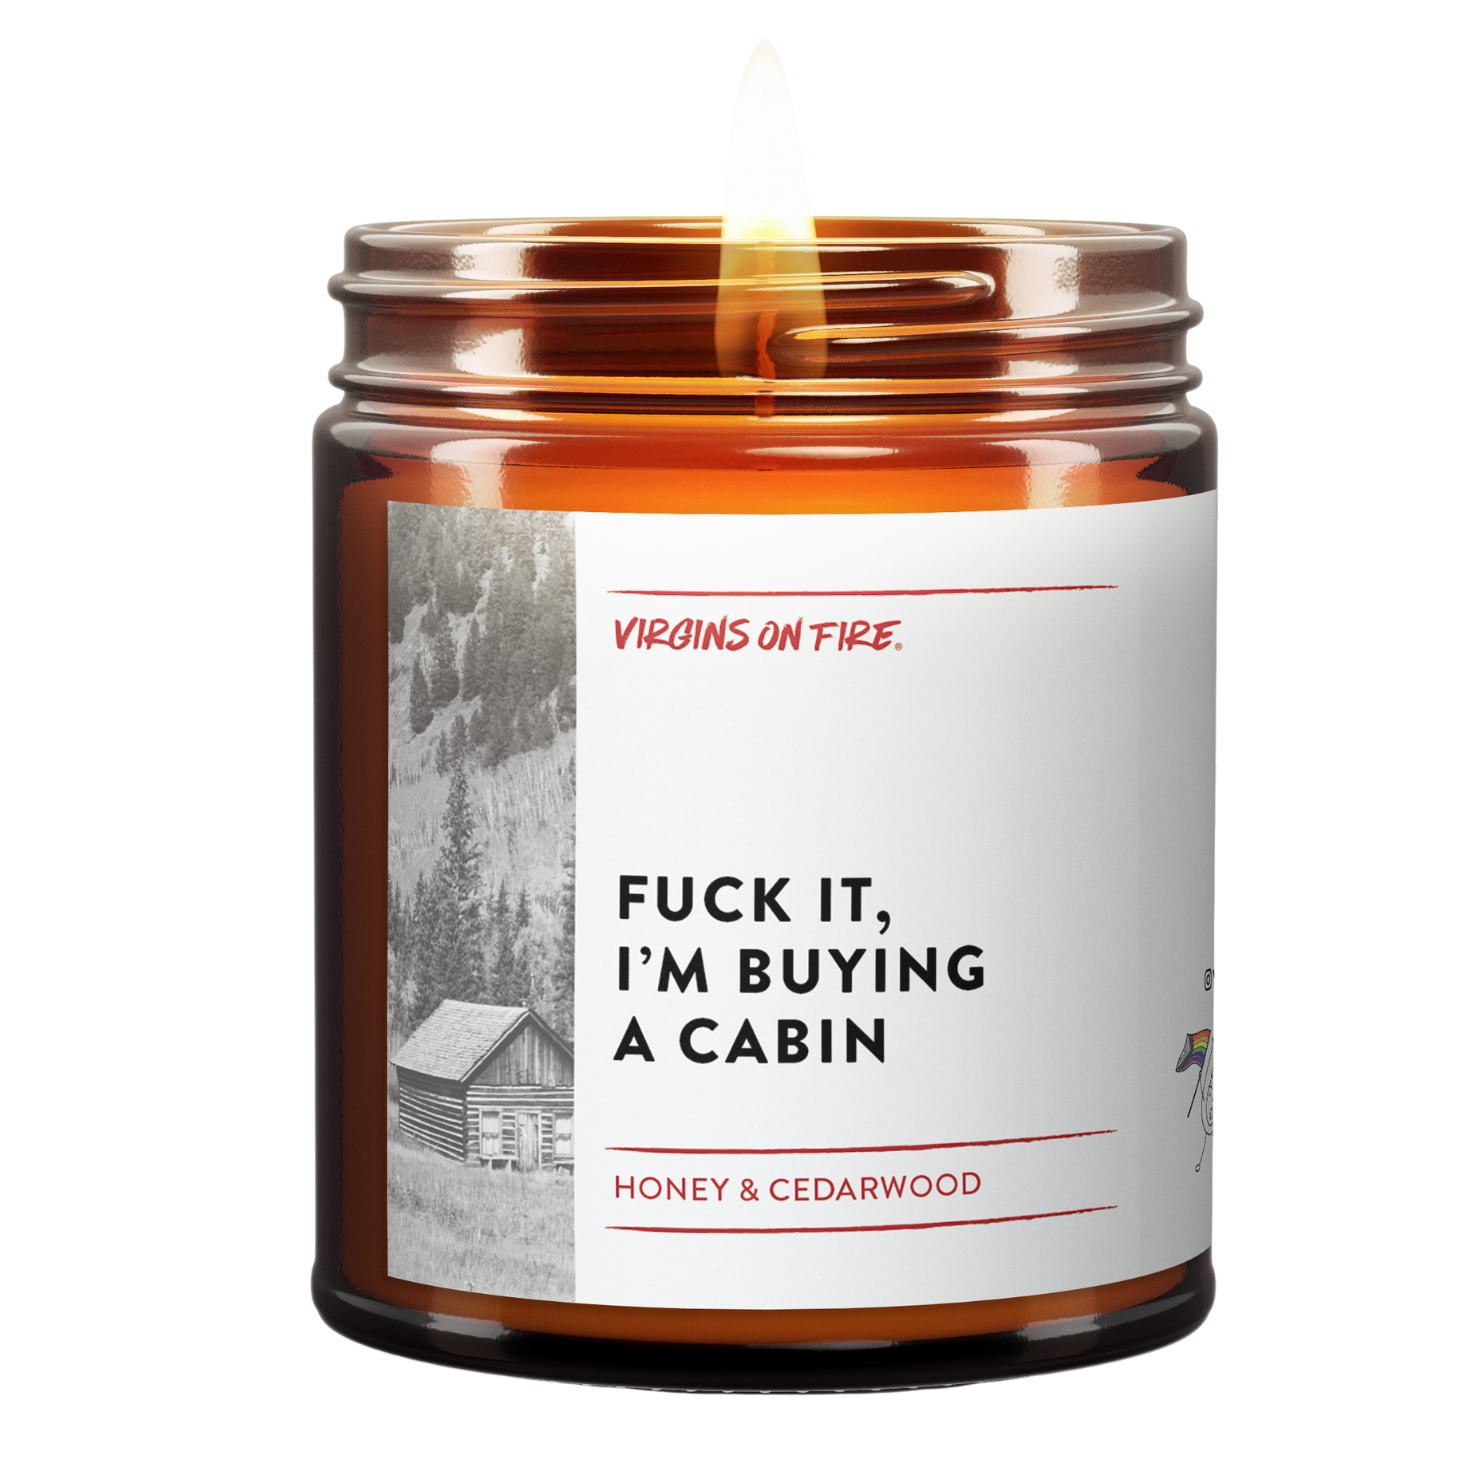 FUCK IT, I'M BUYING A CABIN Honey Scented Candle